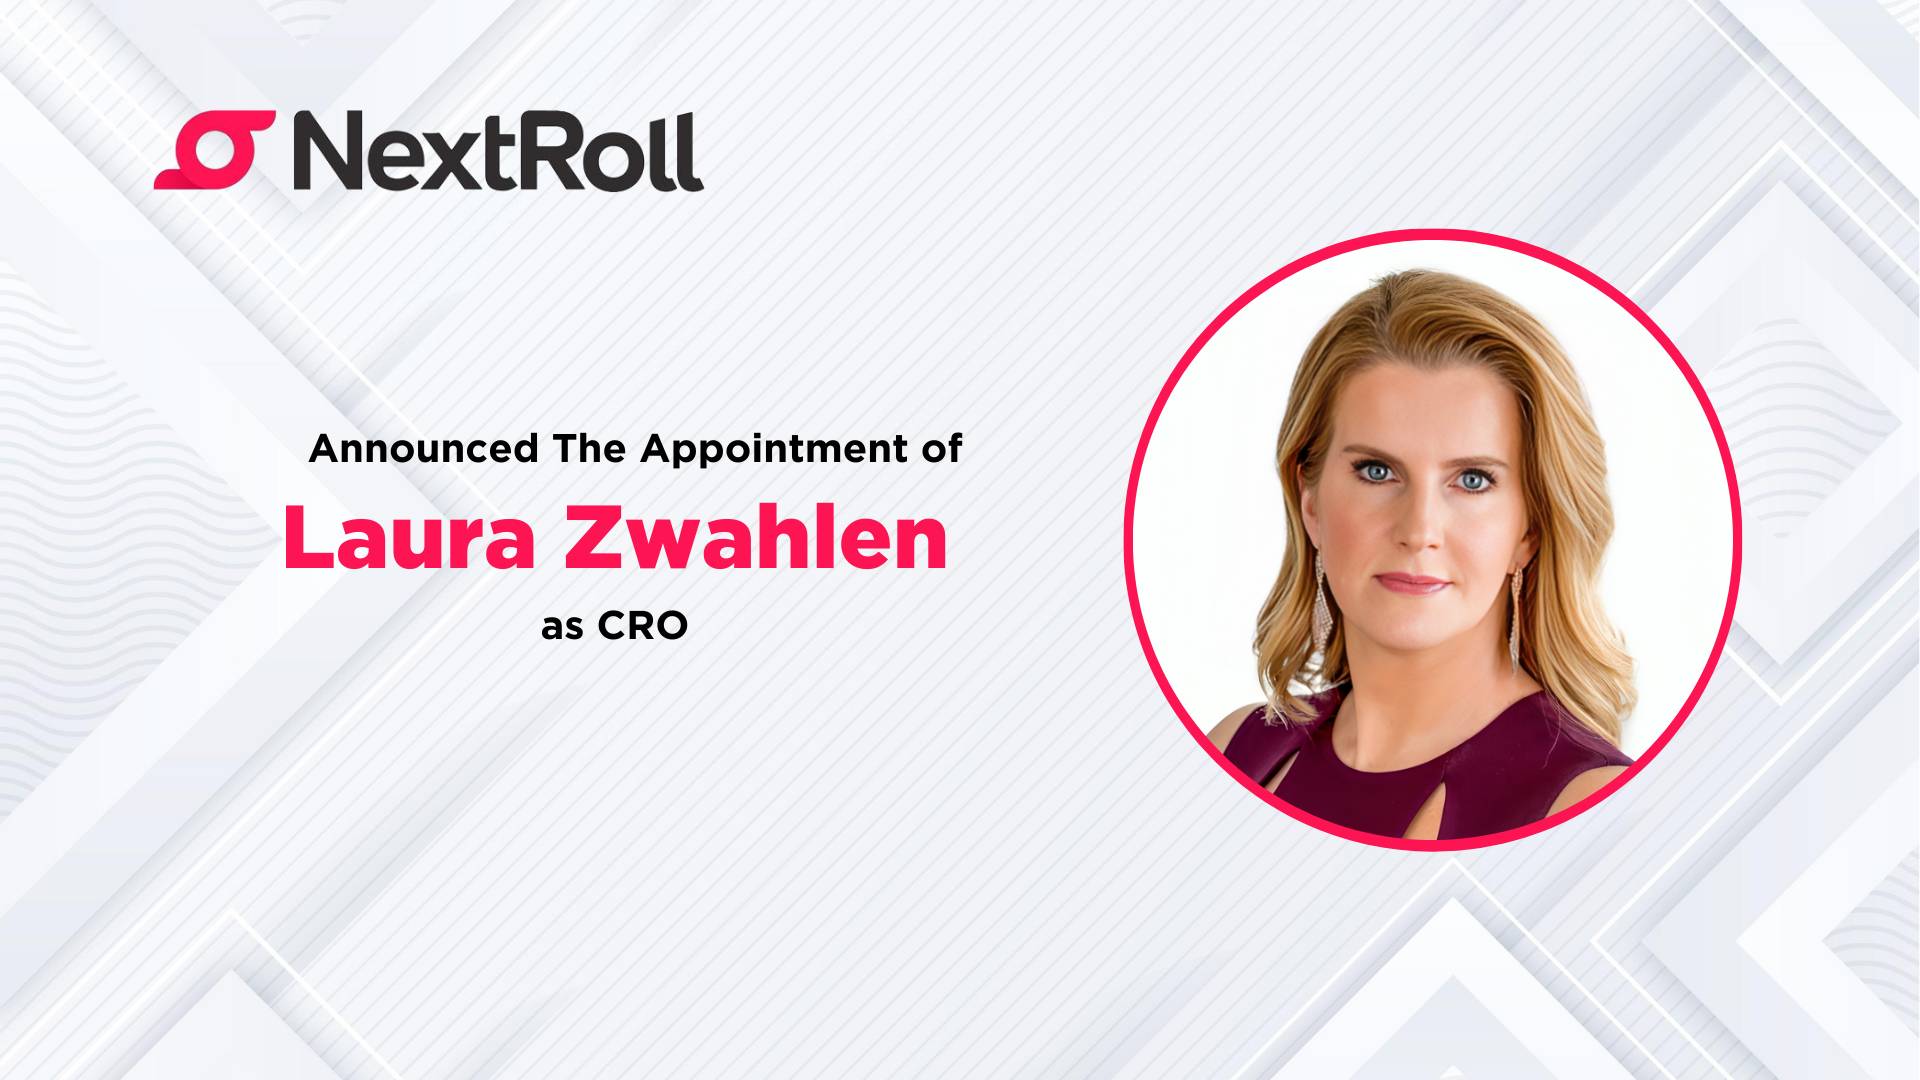 NextRoll Bolsters Leadership Team with the Appointment of Laura Zwahlen as Chief Revenue Officer